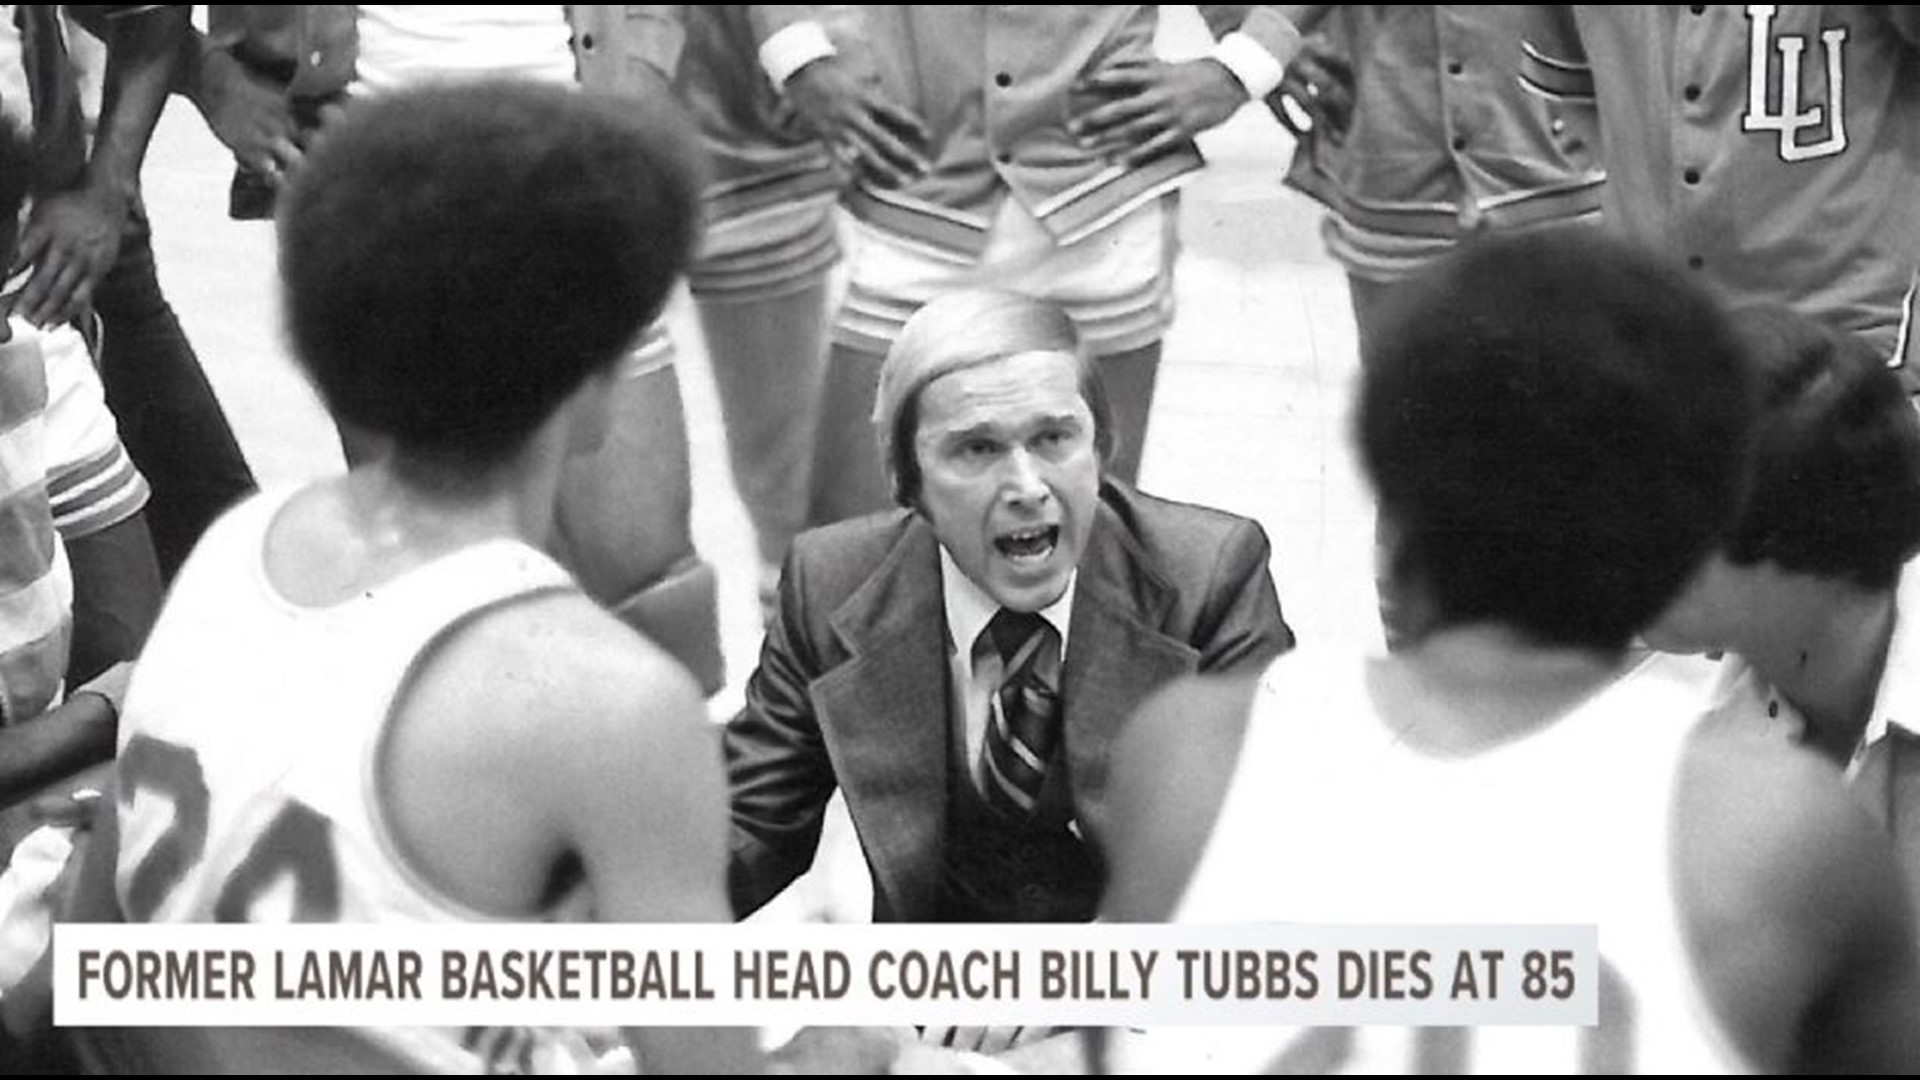 A Cardinal Hall of Honor member, Tubbs coached the Red and White from 1976-80 and 2003-06